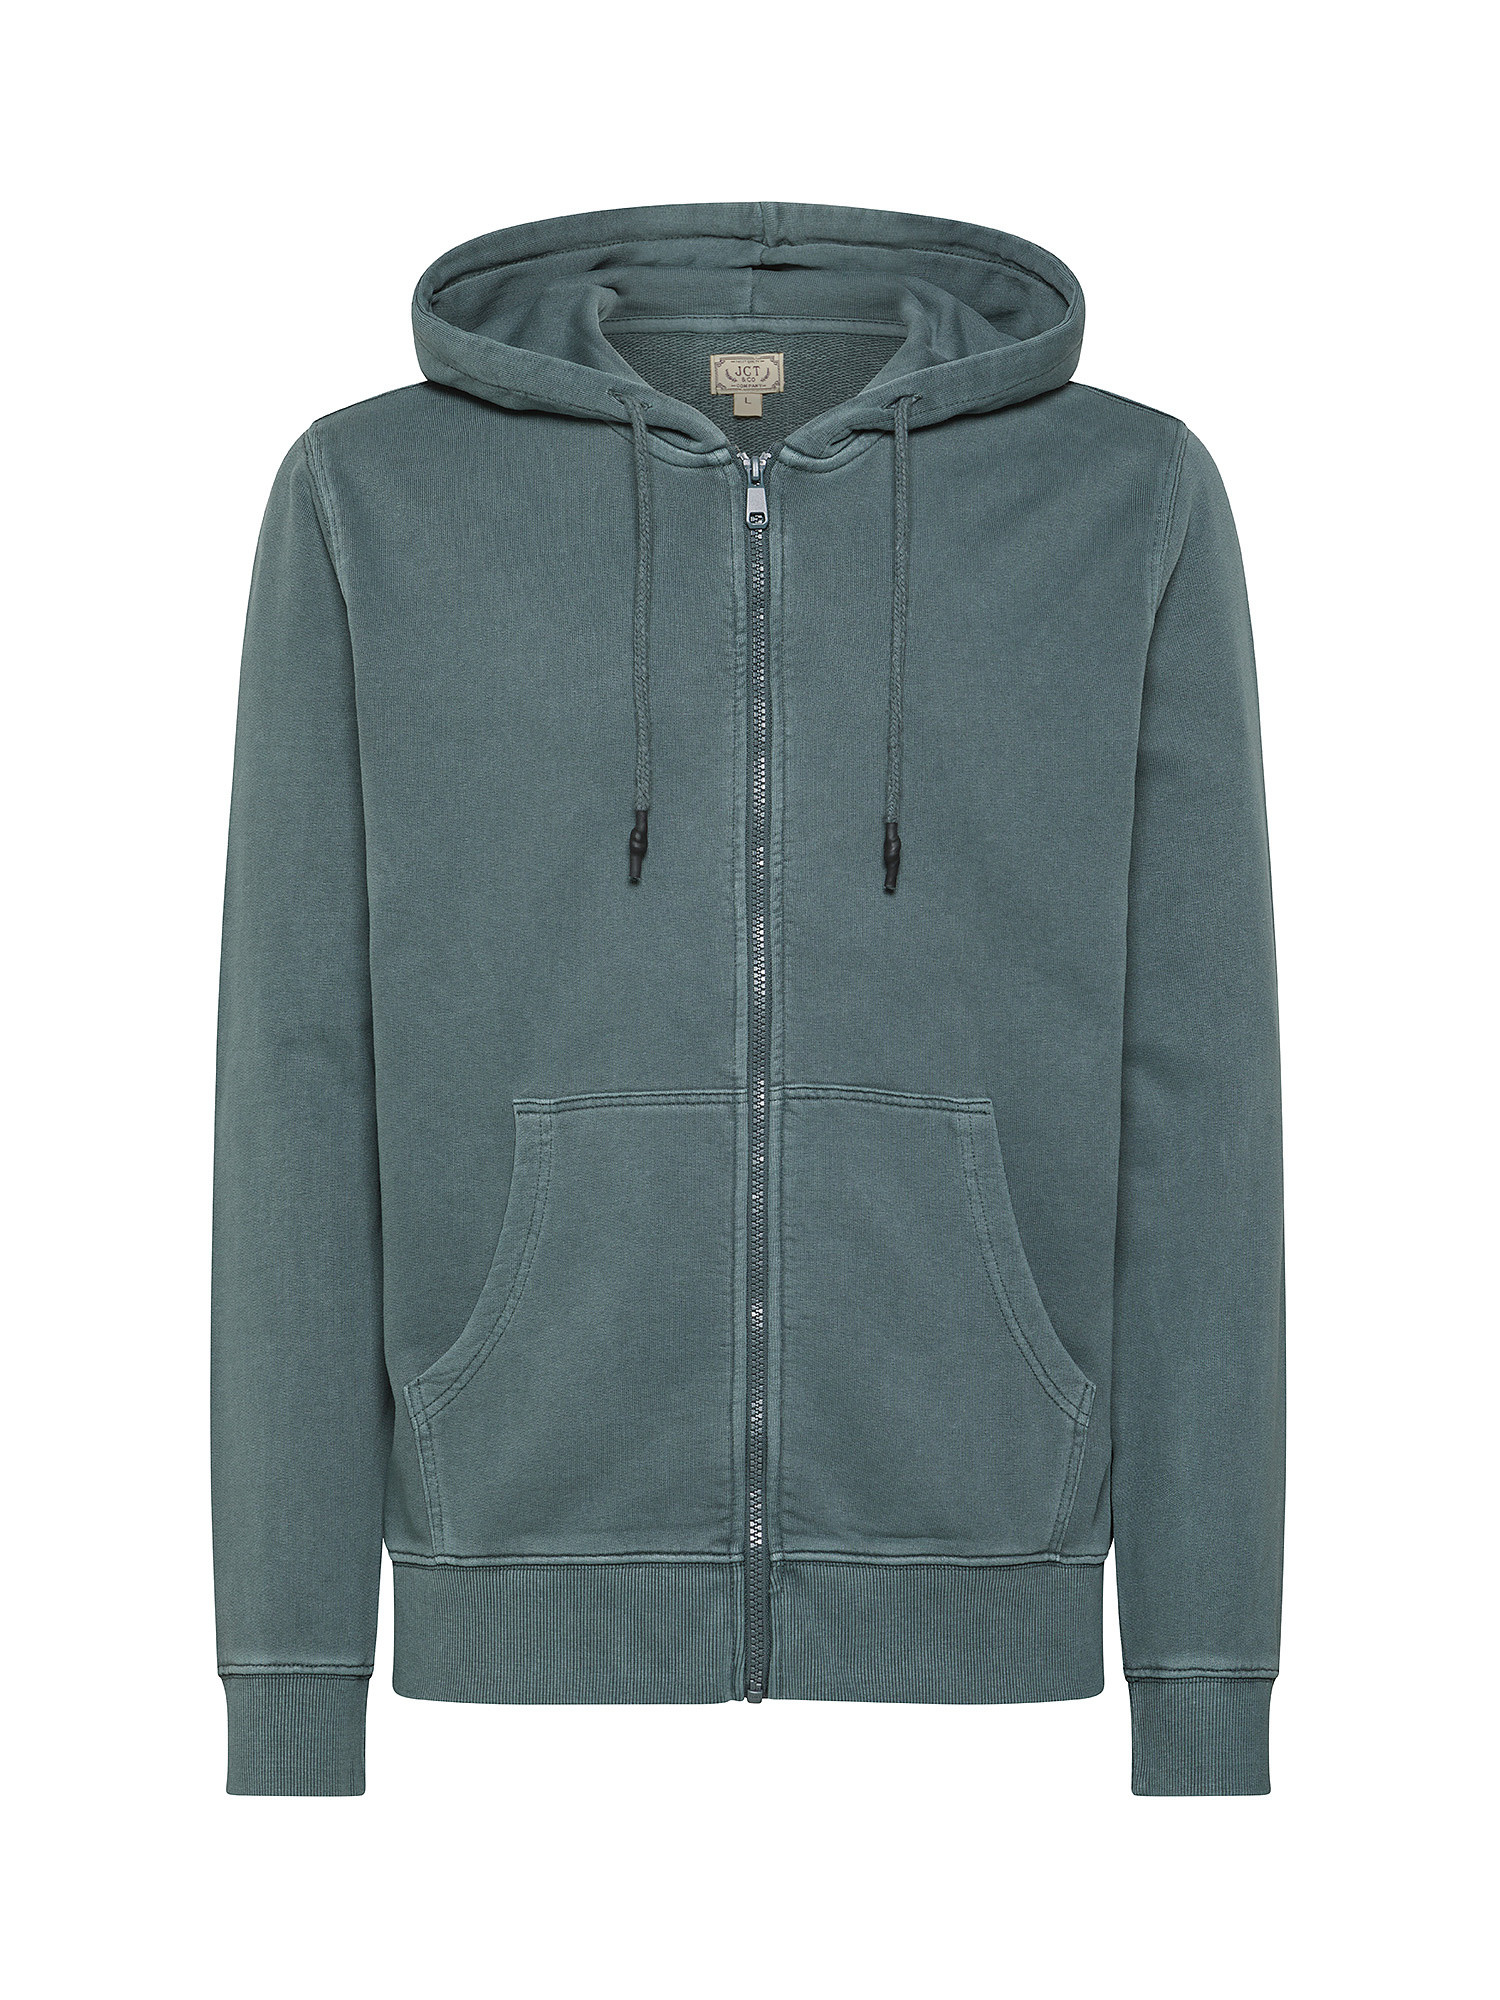 JCT - Pure cotton hooded sweatshirt, Green, large image number 0